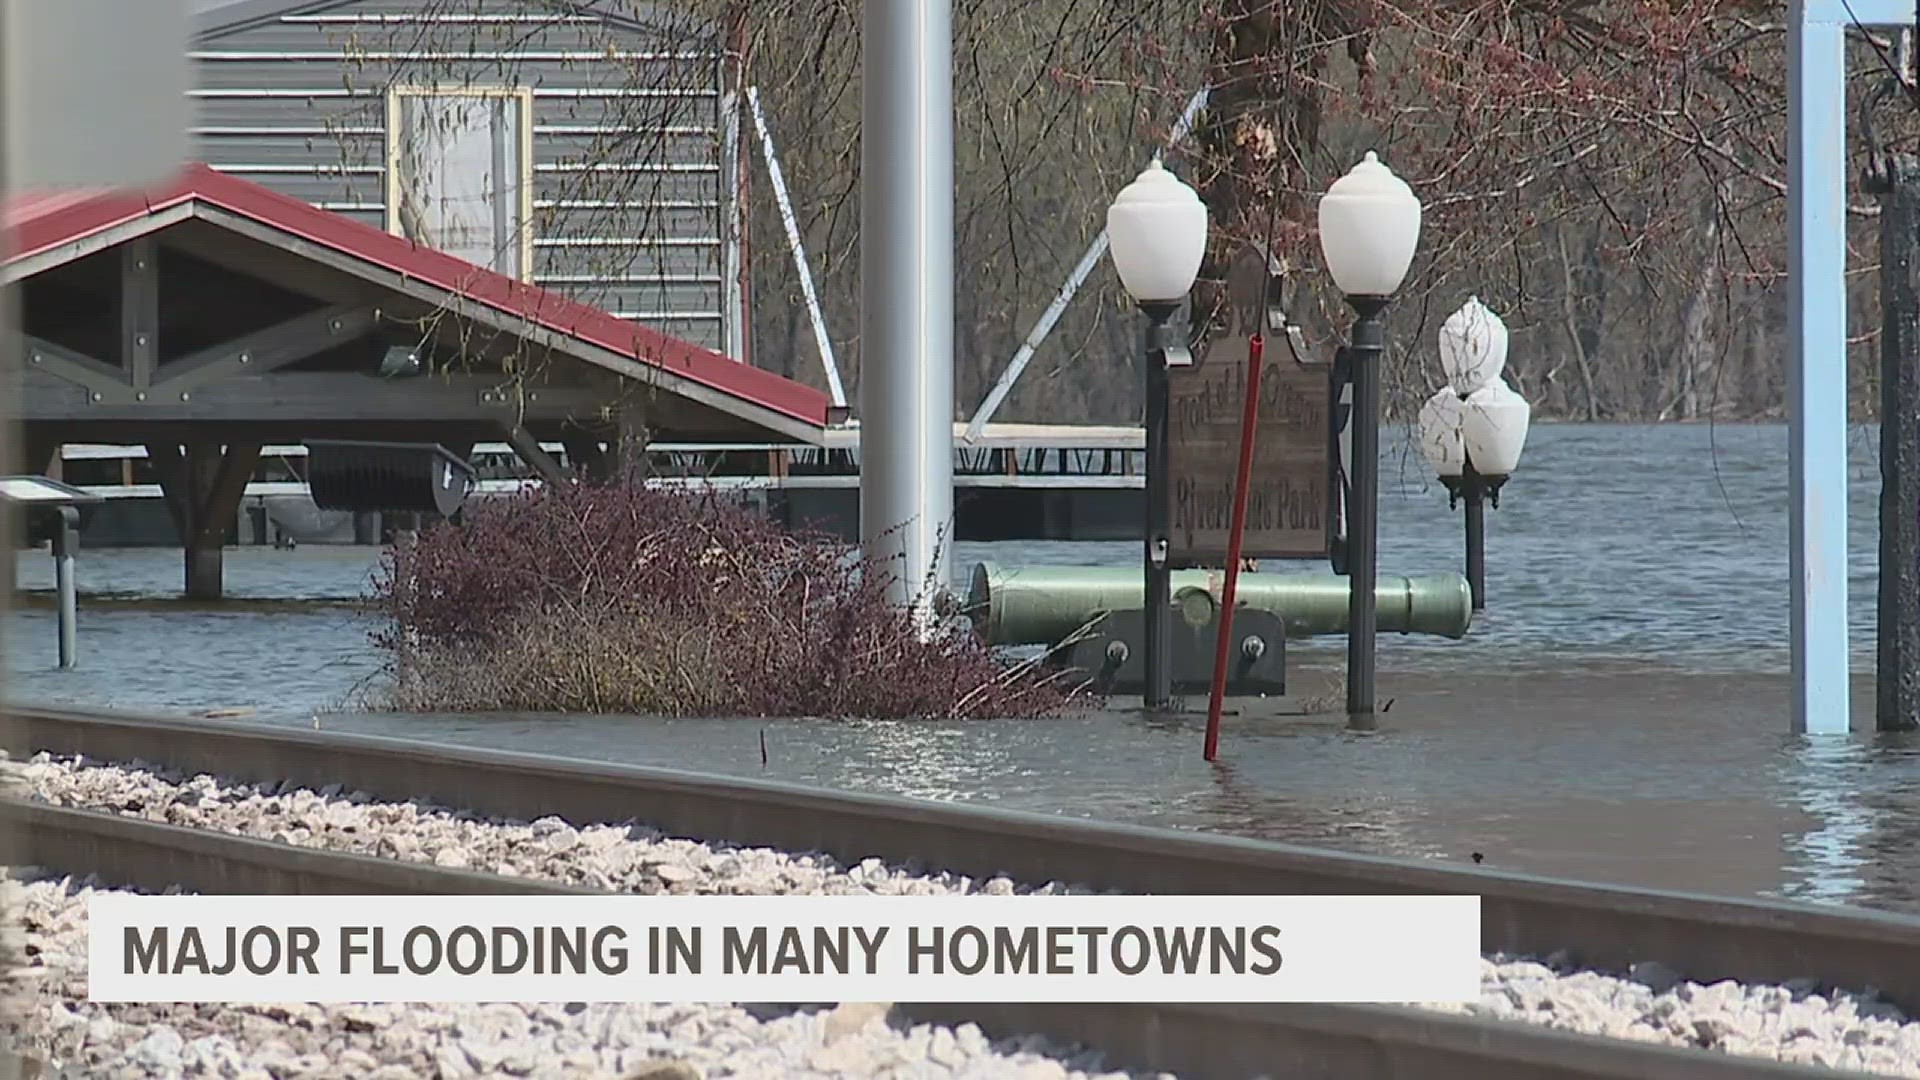 Floodwaters are creeping into McGregor as they may crest on Friday. The river has also overtaken Sunset Park in Rock Island and River Dr. in Moline.